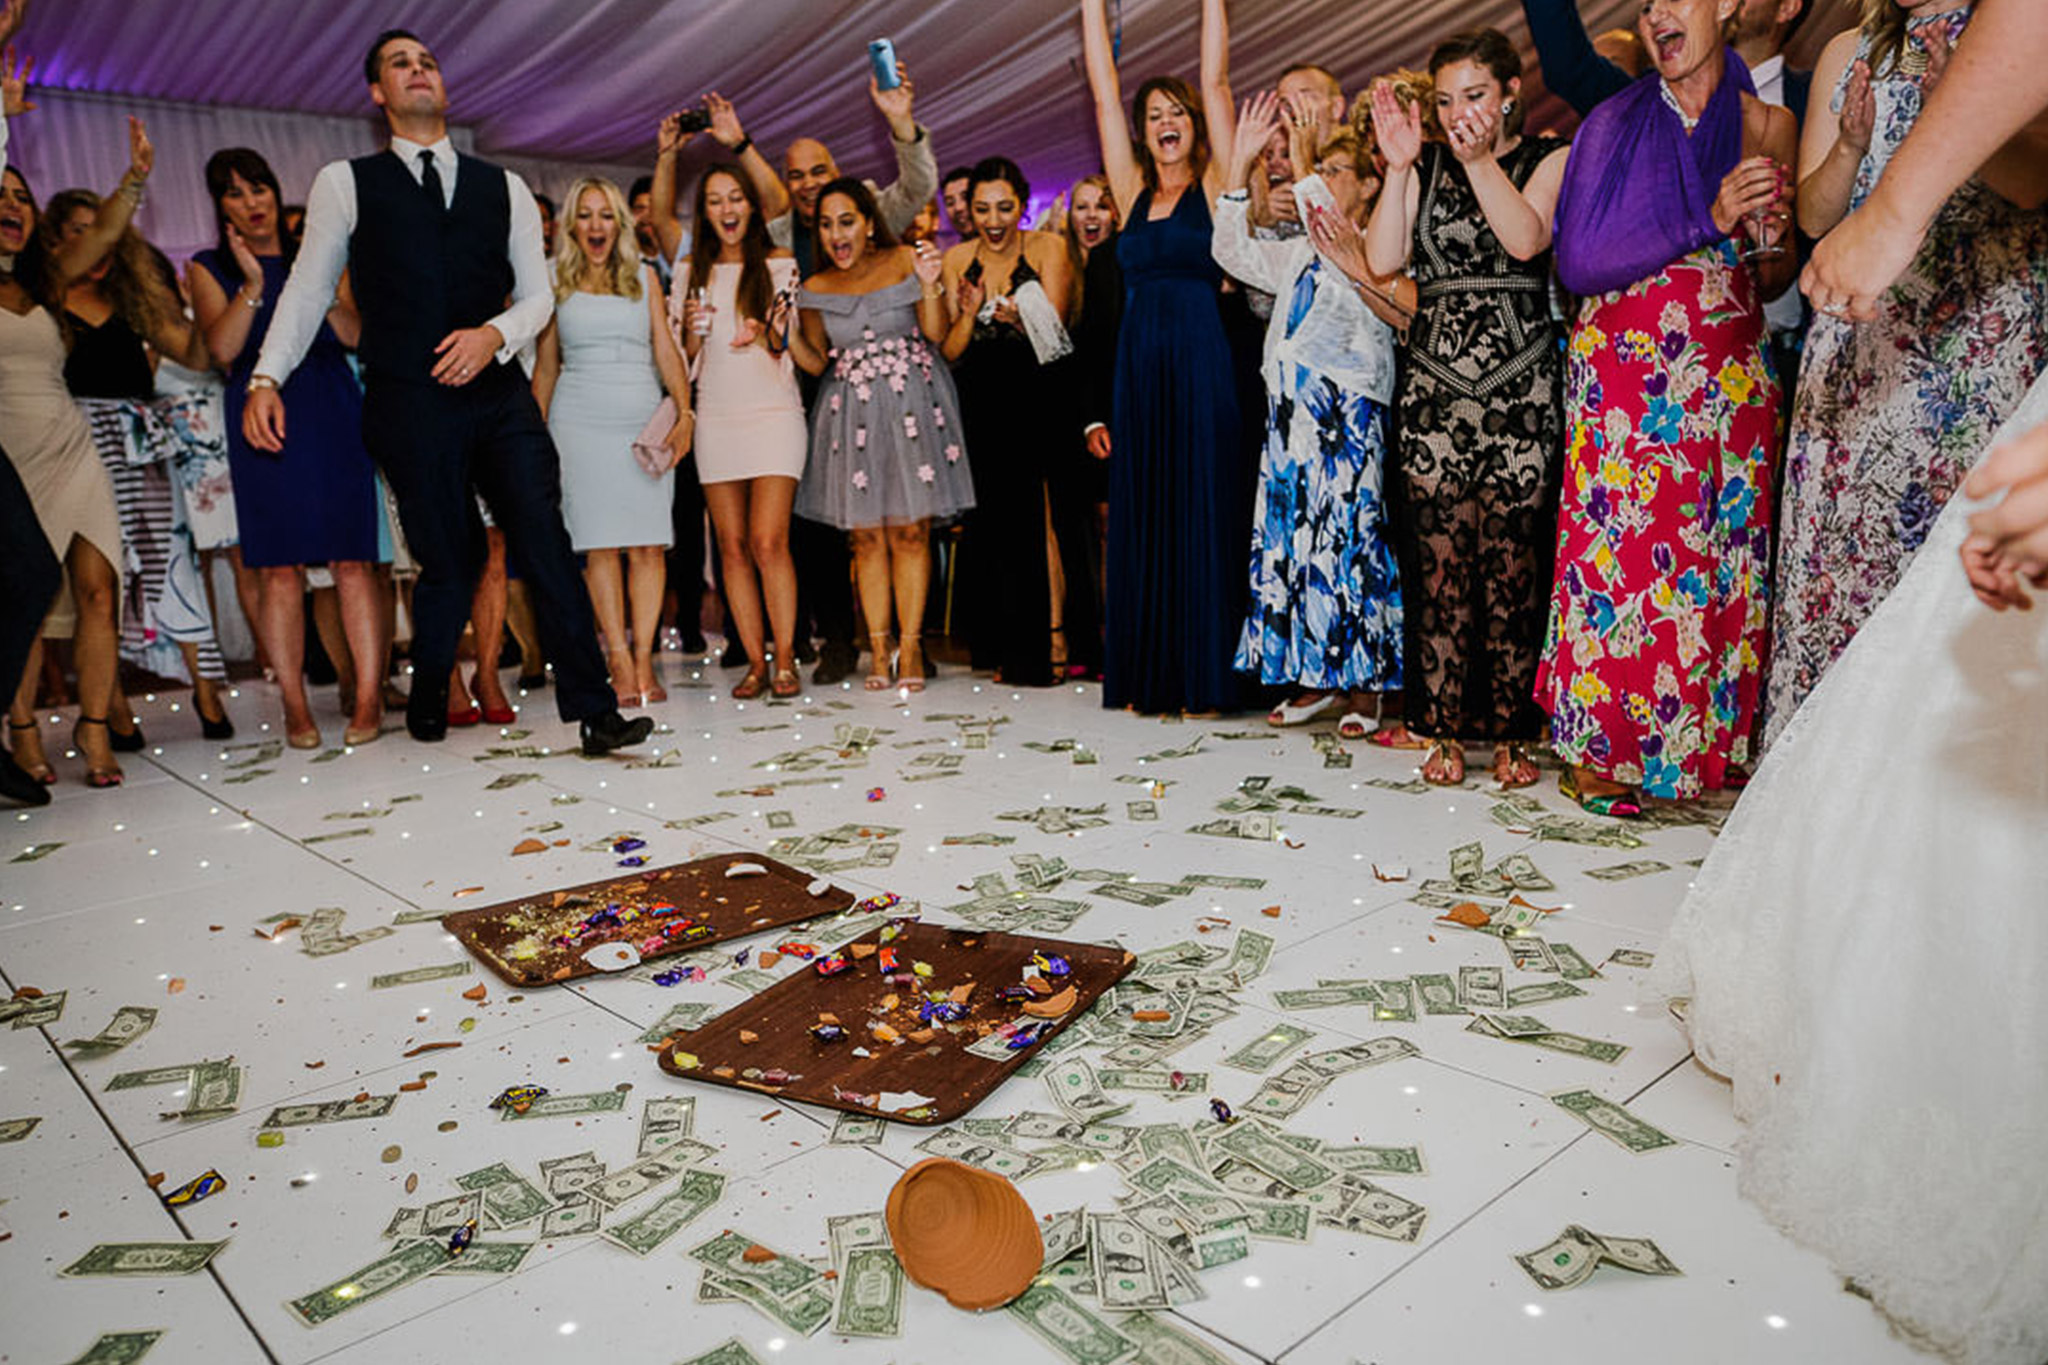 Turkish wedding party celebrating at Boreham house. With dollars and pots on the floor and bridal party cheering in the background